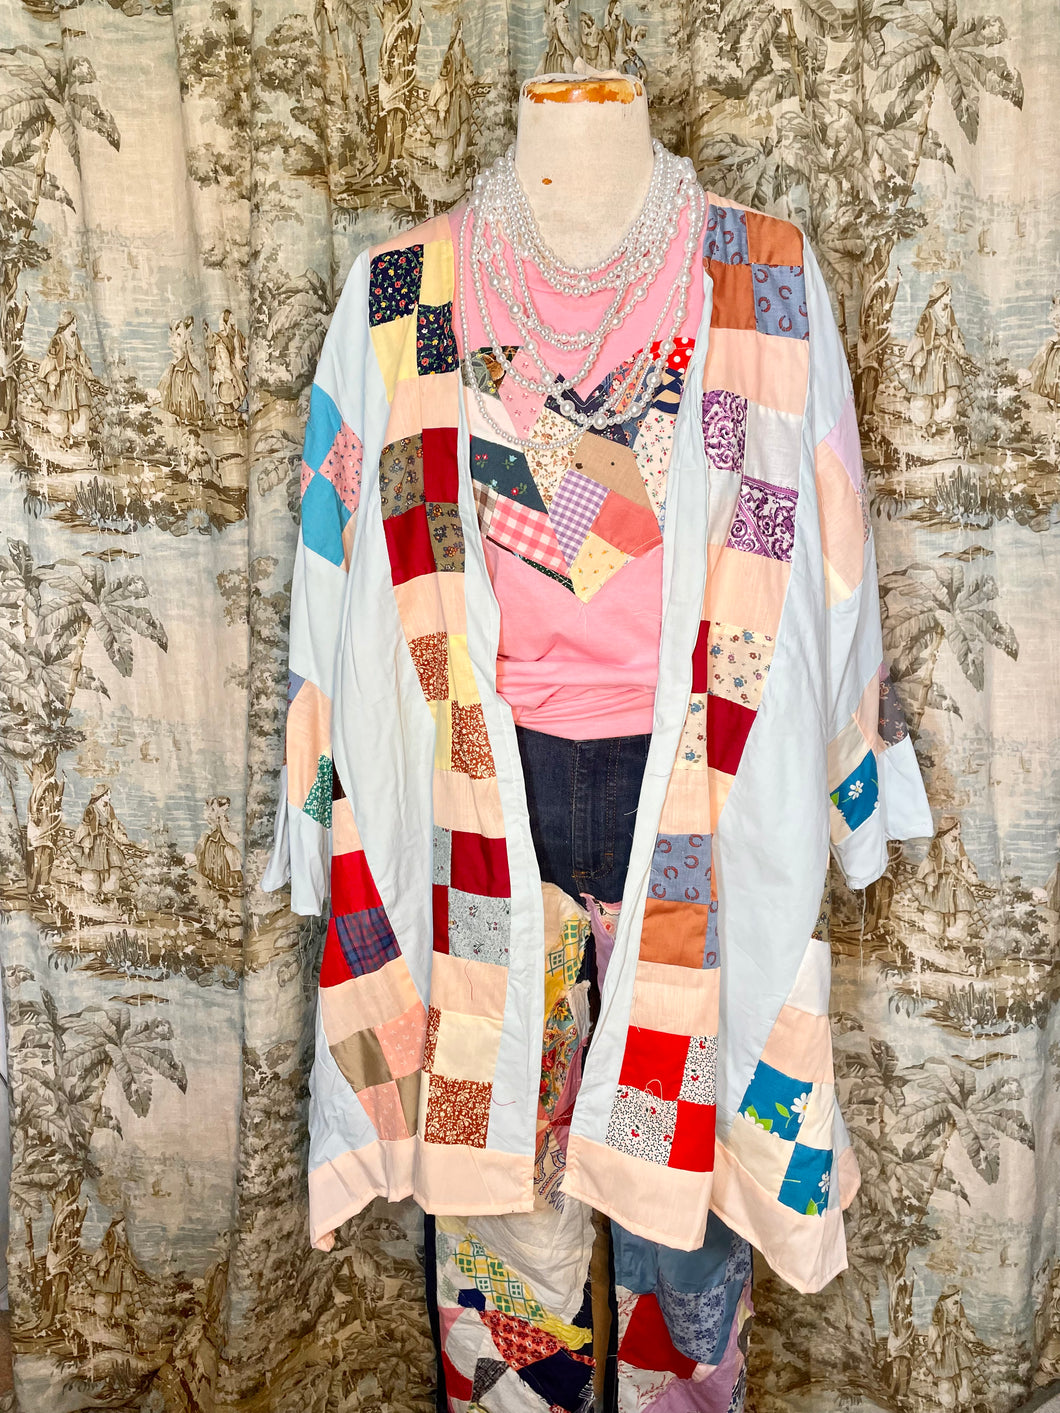 Vintage Quilt Pastels Tunic Top Handmade Bohemian Gypsy Style Festival Quilt Top Vintage Patchwork Quilt Top handmade / grandmas garden quilt dress / long quilt dress Quilt Patchwork Dress / Vintage Patchwork Quilt / Farm Dress